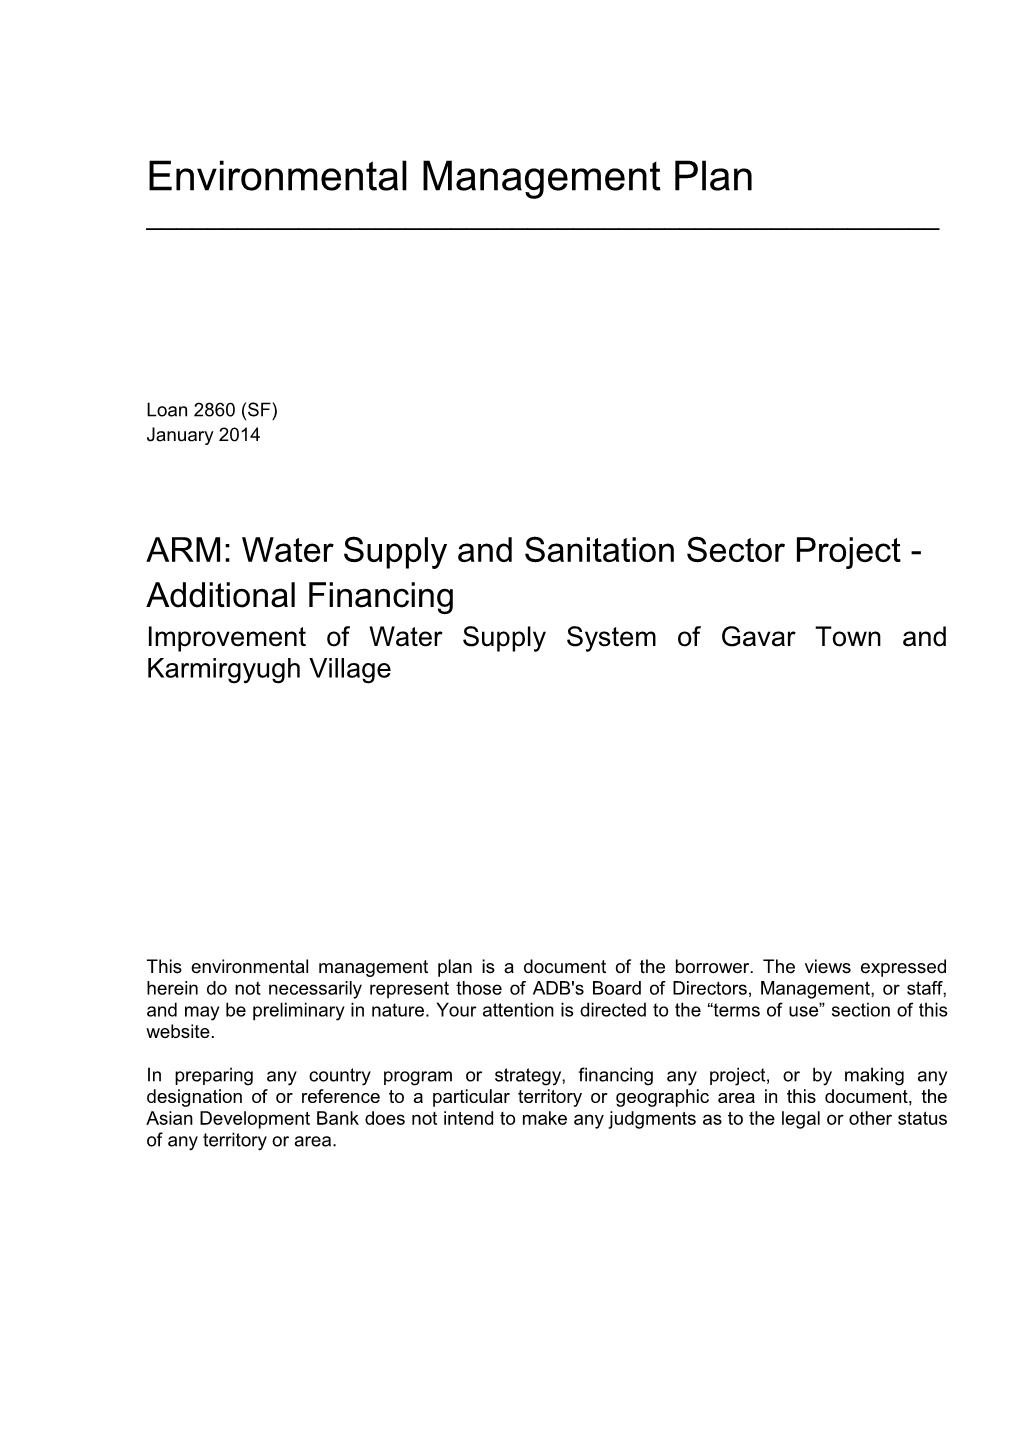 Water Supply and Sanitation Sector Project - Additional Financing Improvement of Water Supply System of Gavar Town and Karmirgyugh Village